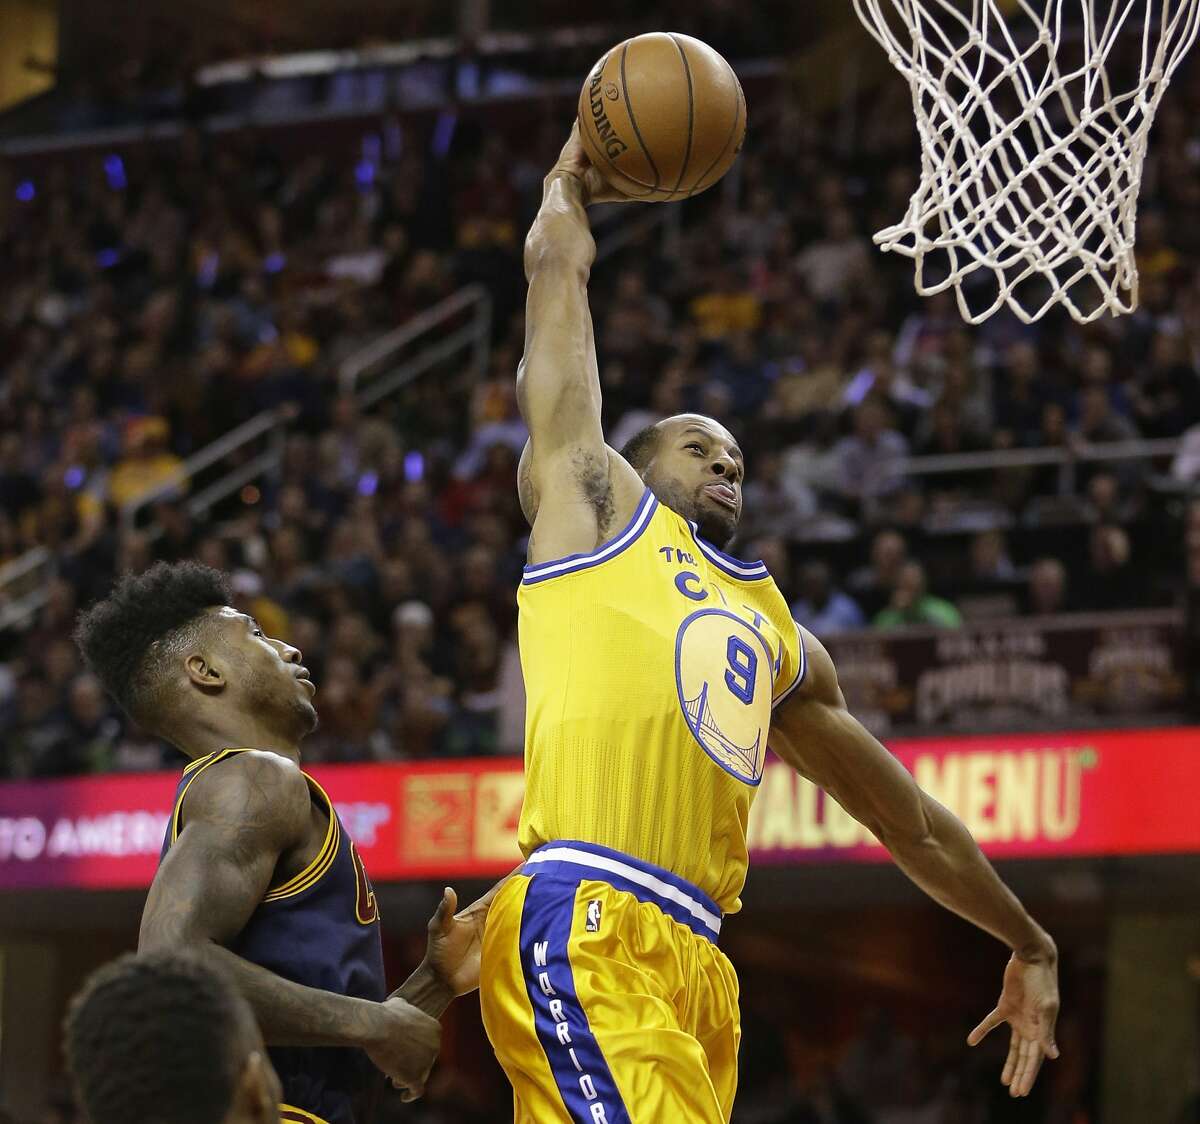 Golden State Warriors' Andre Iguodala (9) dunks the ball in front of Cleveland Cavaliers' Iman Shumpert (4) in the first half of an NBA basketball game Monday, Jan. 18, 2016, in Cleveland. (AP Photo/Tony Dejak)